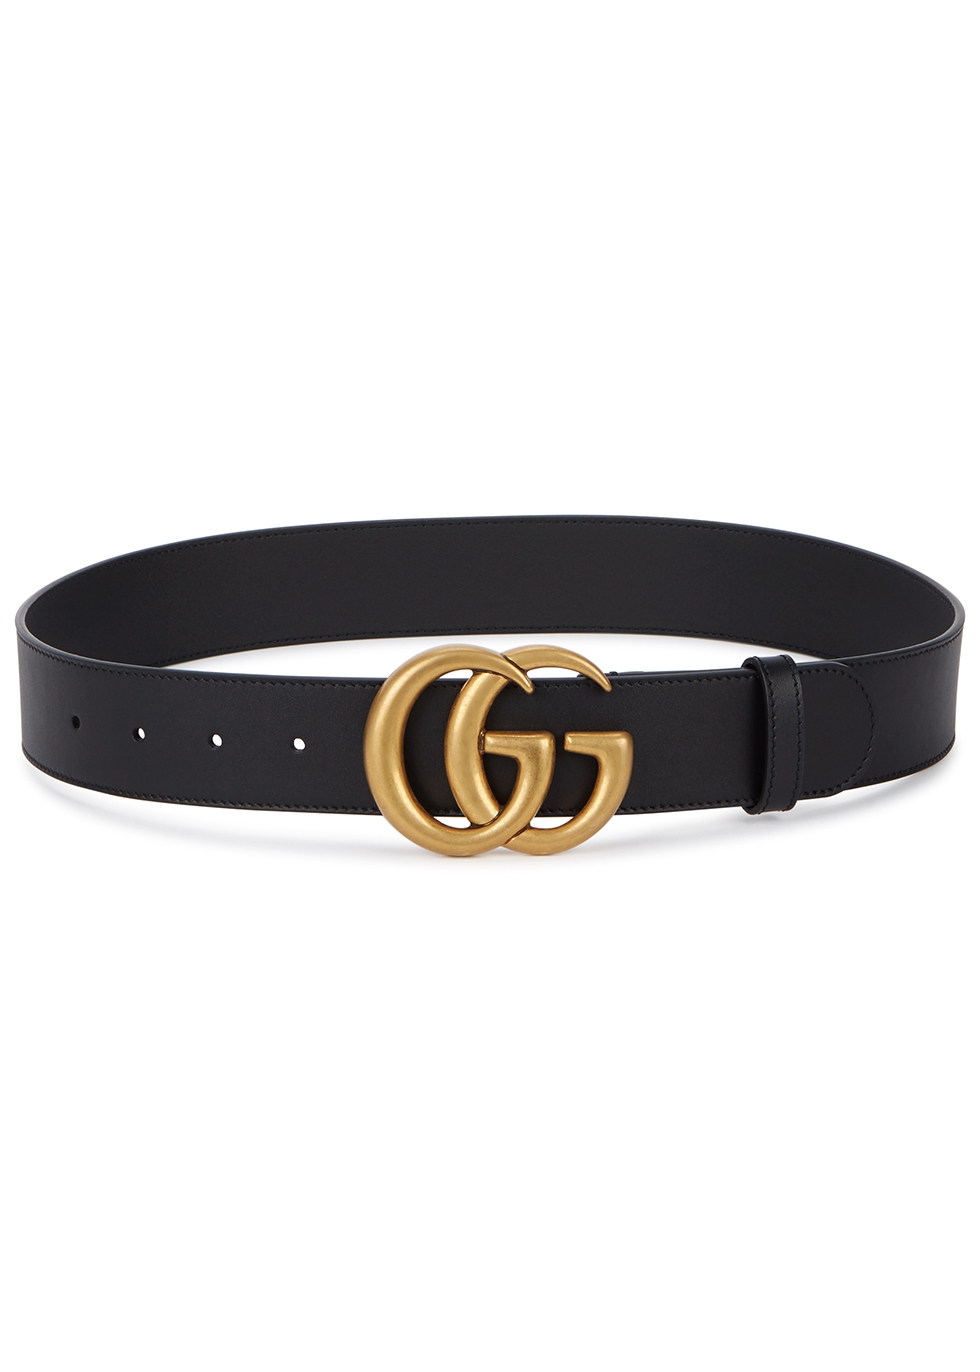 what is the gg belt